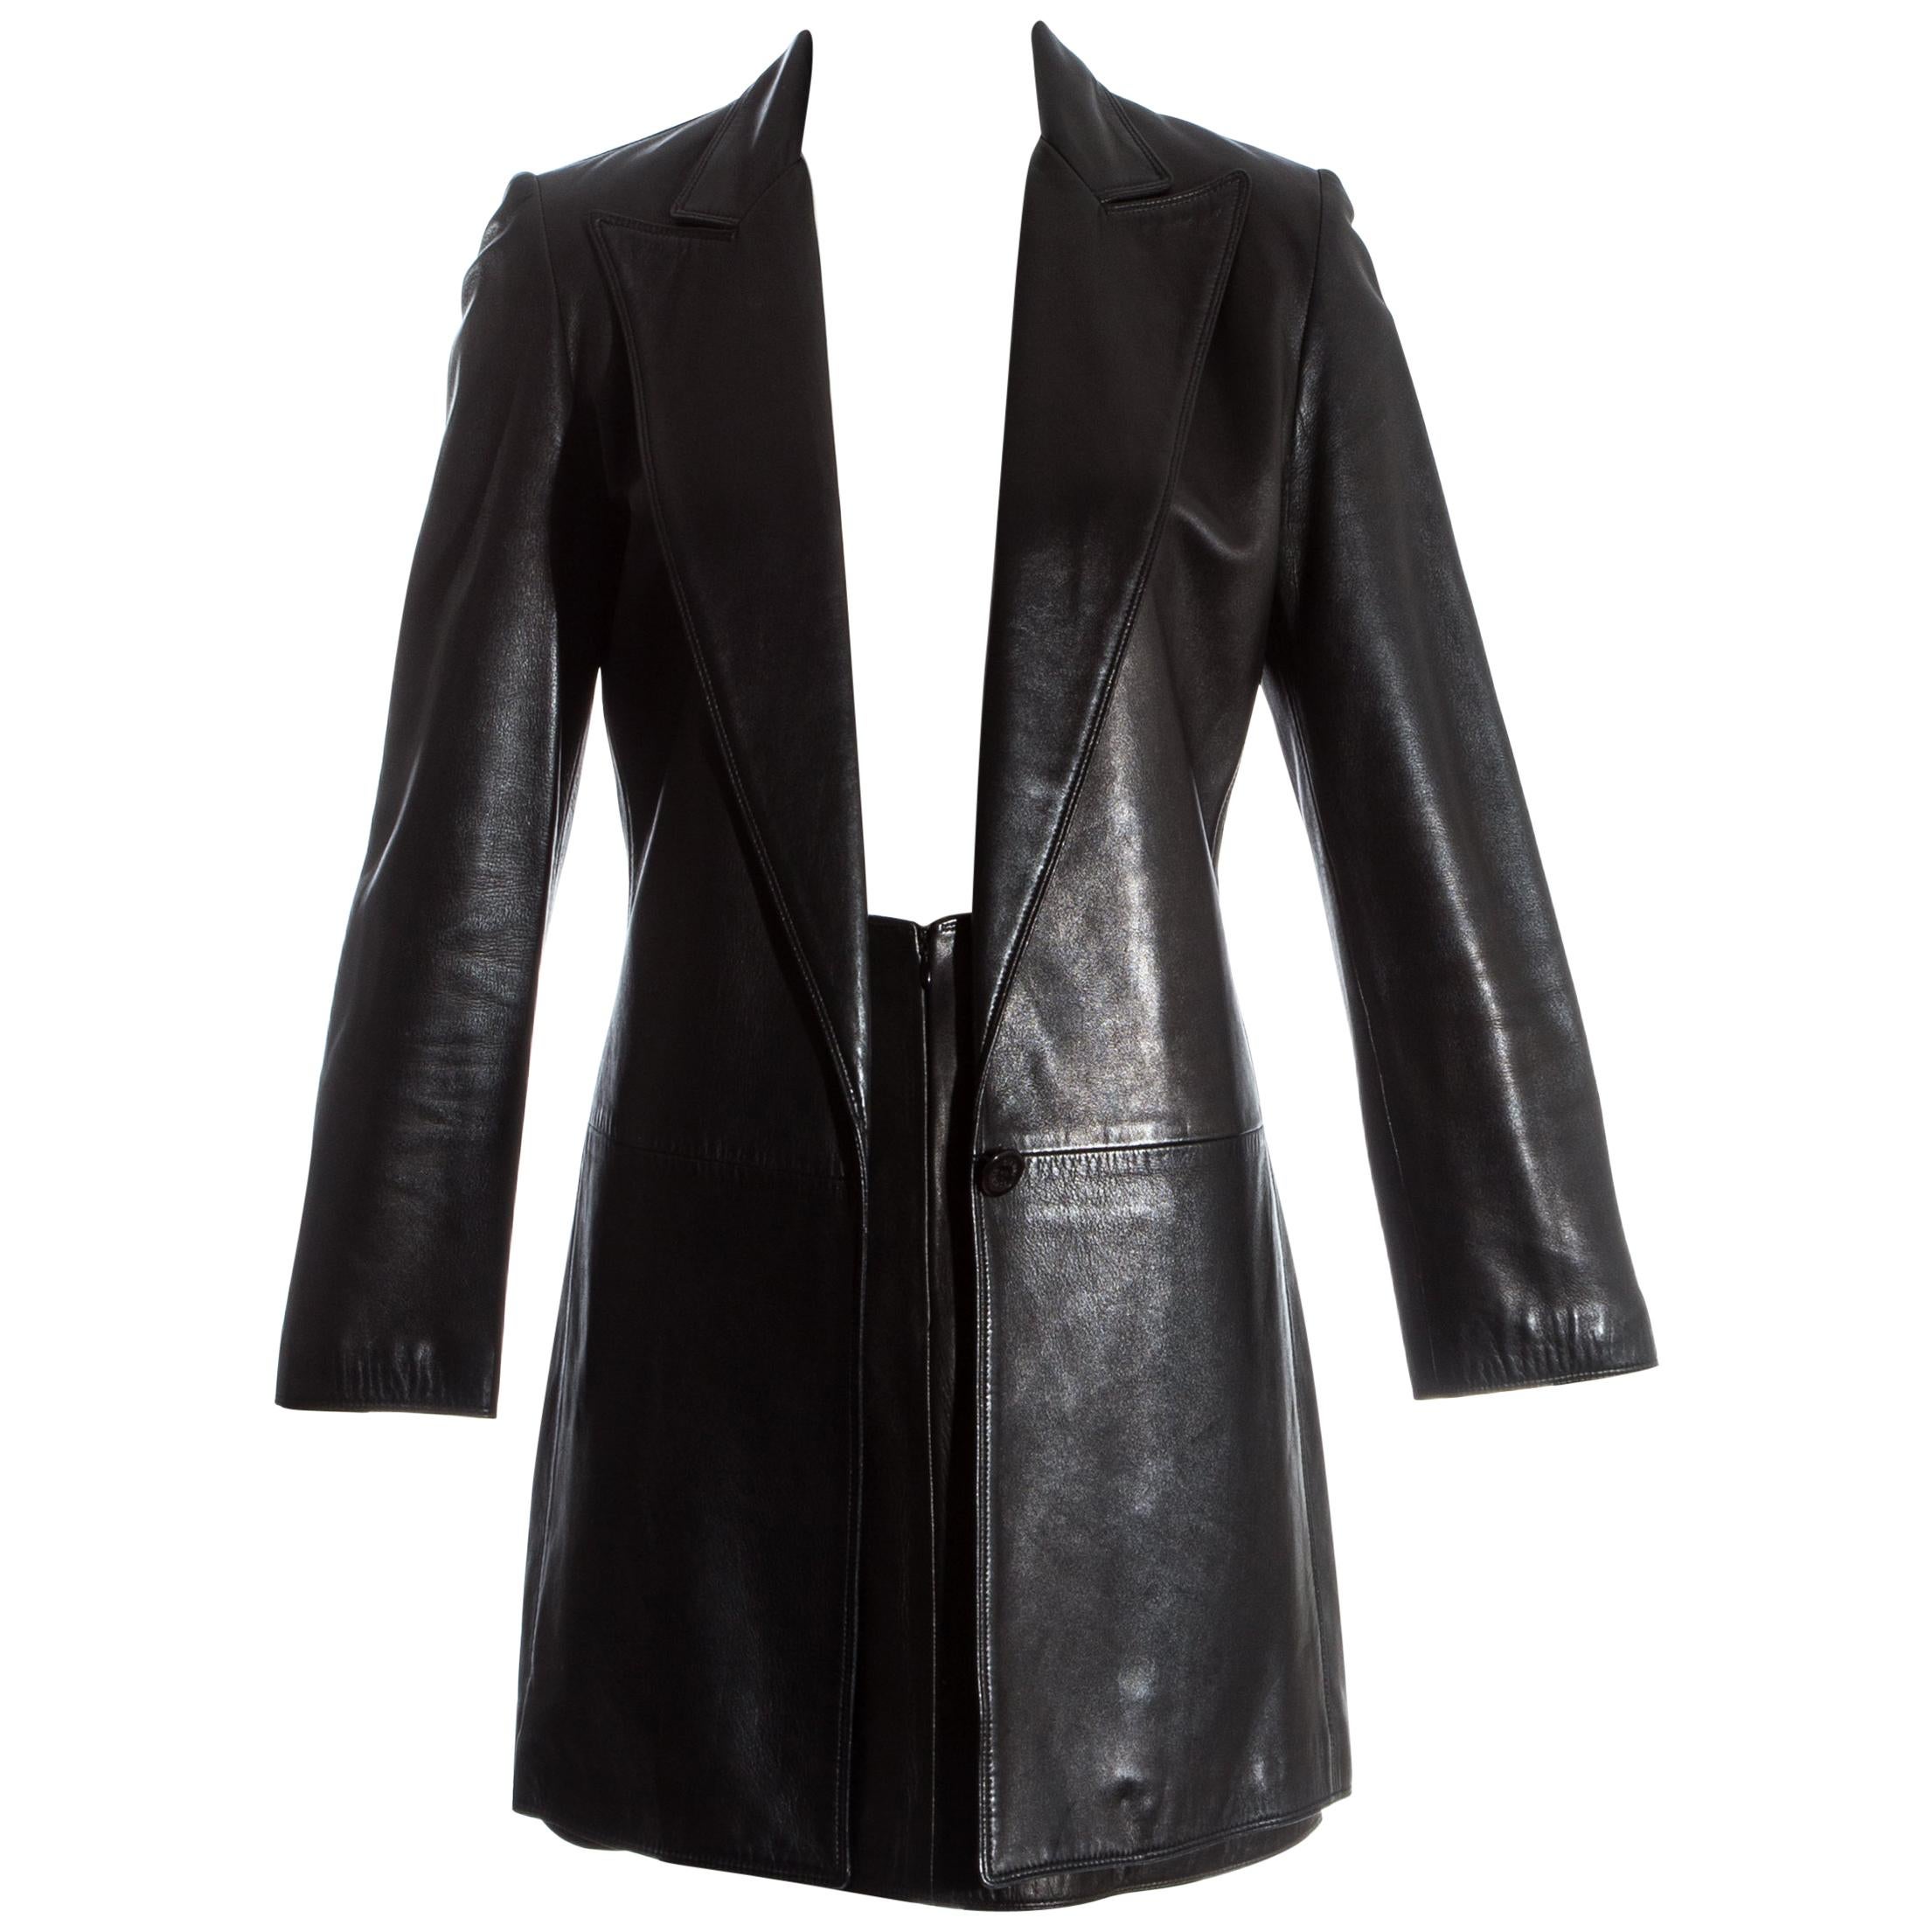 Gianni Versace black lambskin leather blazer jacket and skirt suit, fw 1997 For Sale